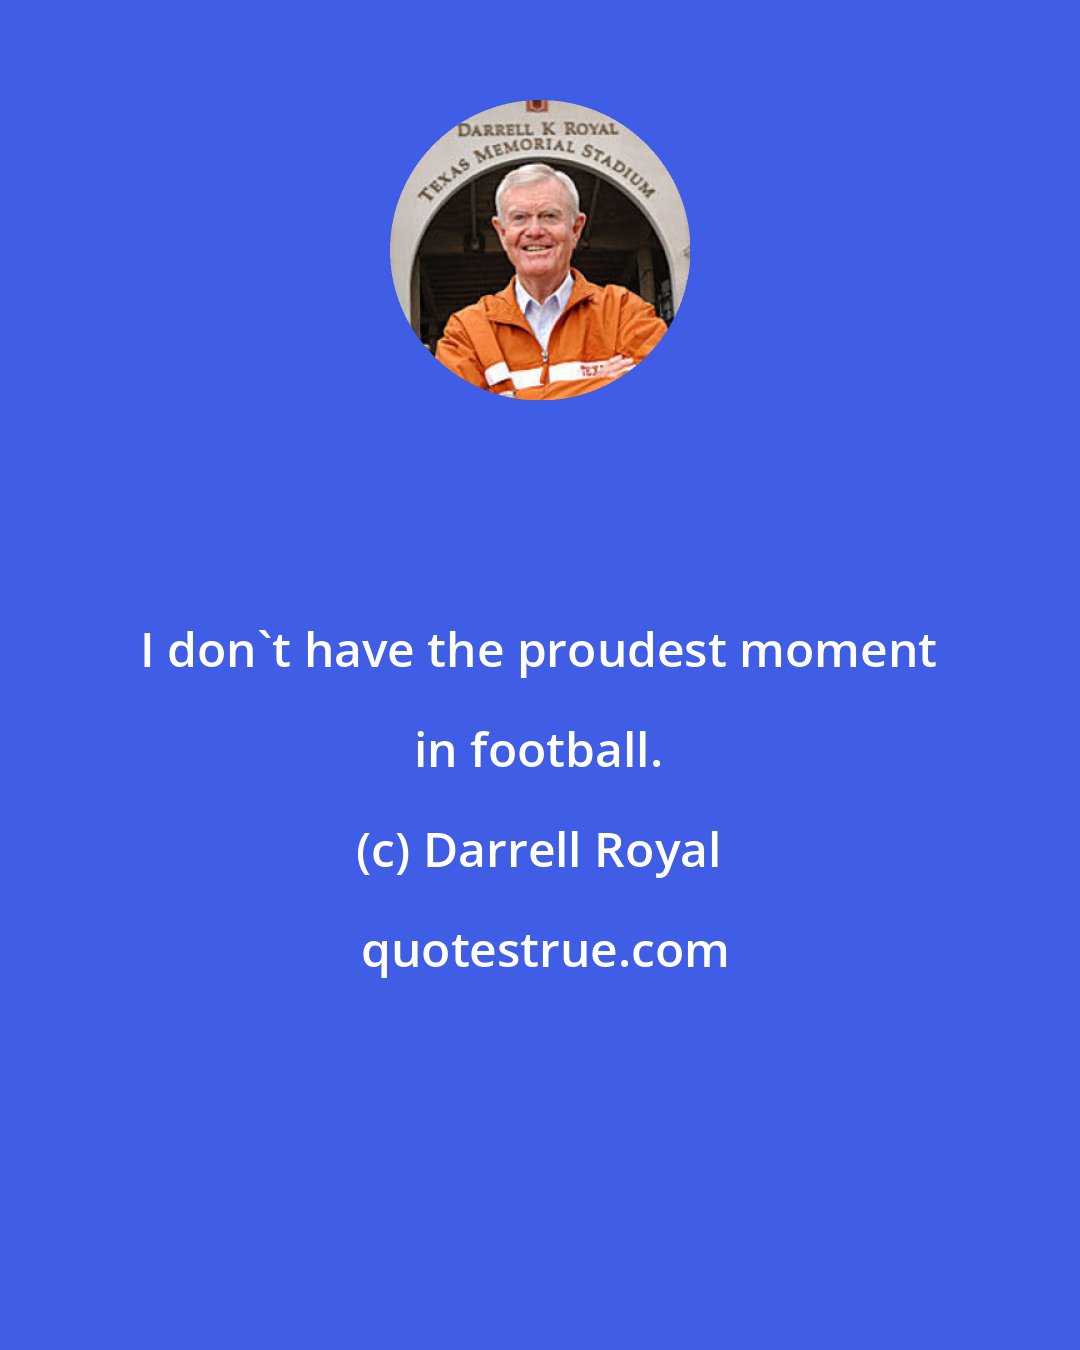 Darrell Royal: I don't have the proudest moment in football.